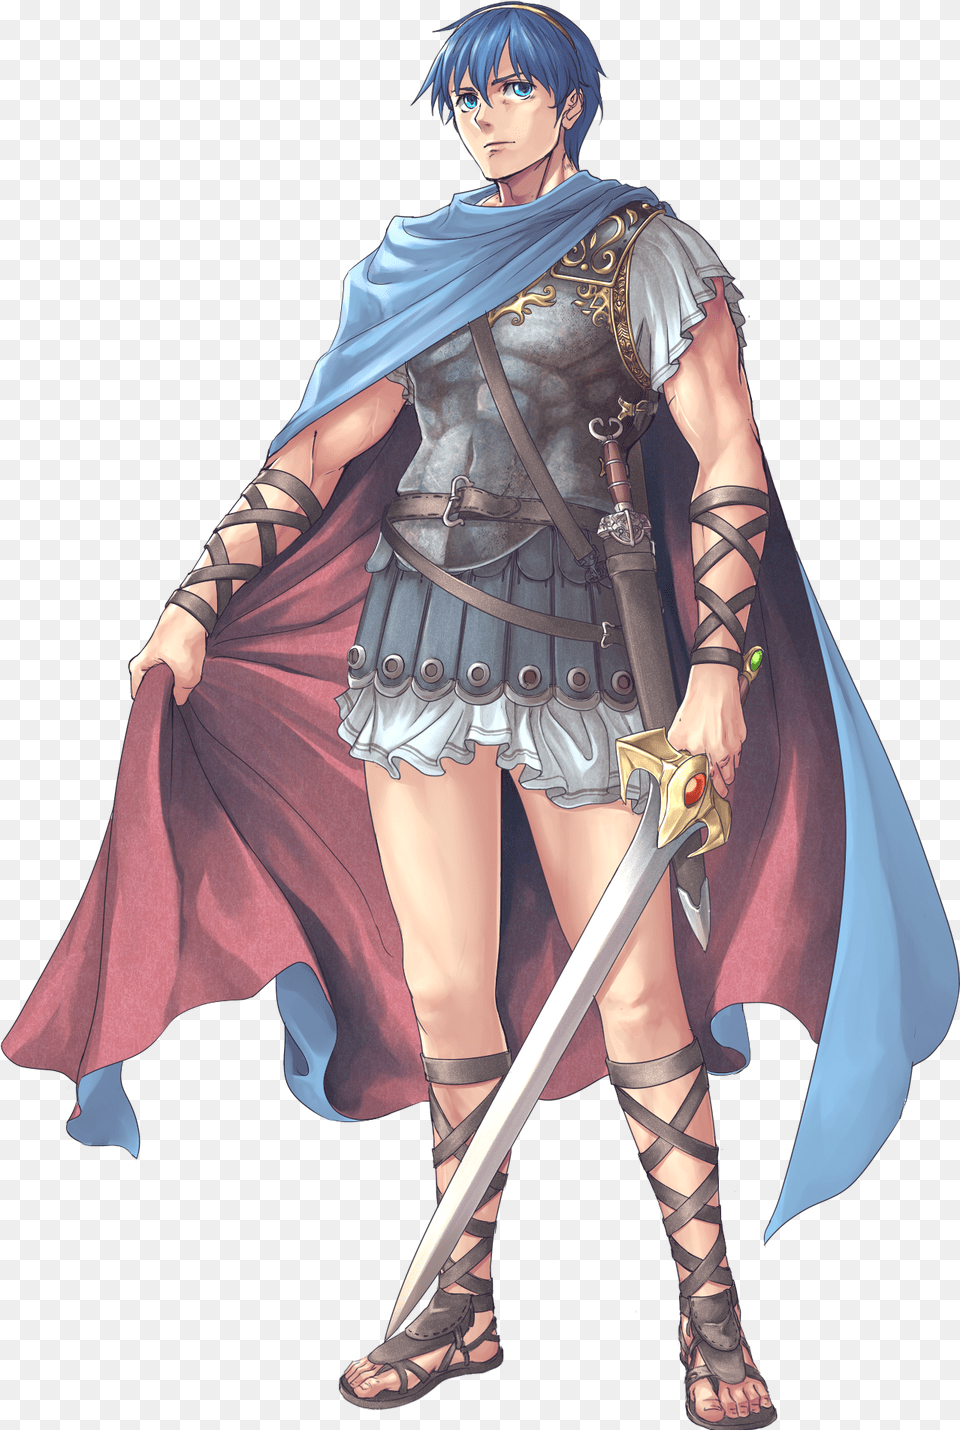 If The Outfit Of Marth Is Designed Similar To One In Shadow Dragon Marth Fire Emblem, Weapon, Sword, Adult, Person Png Image